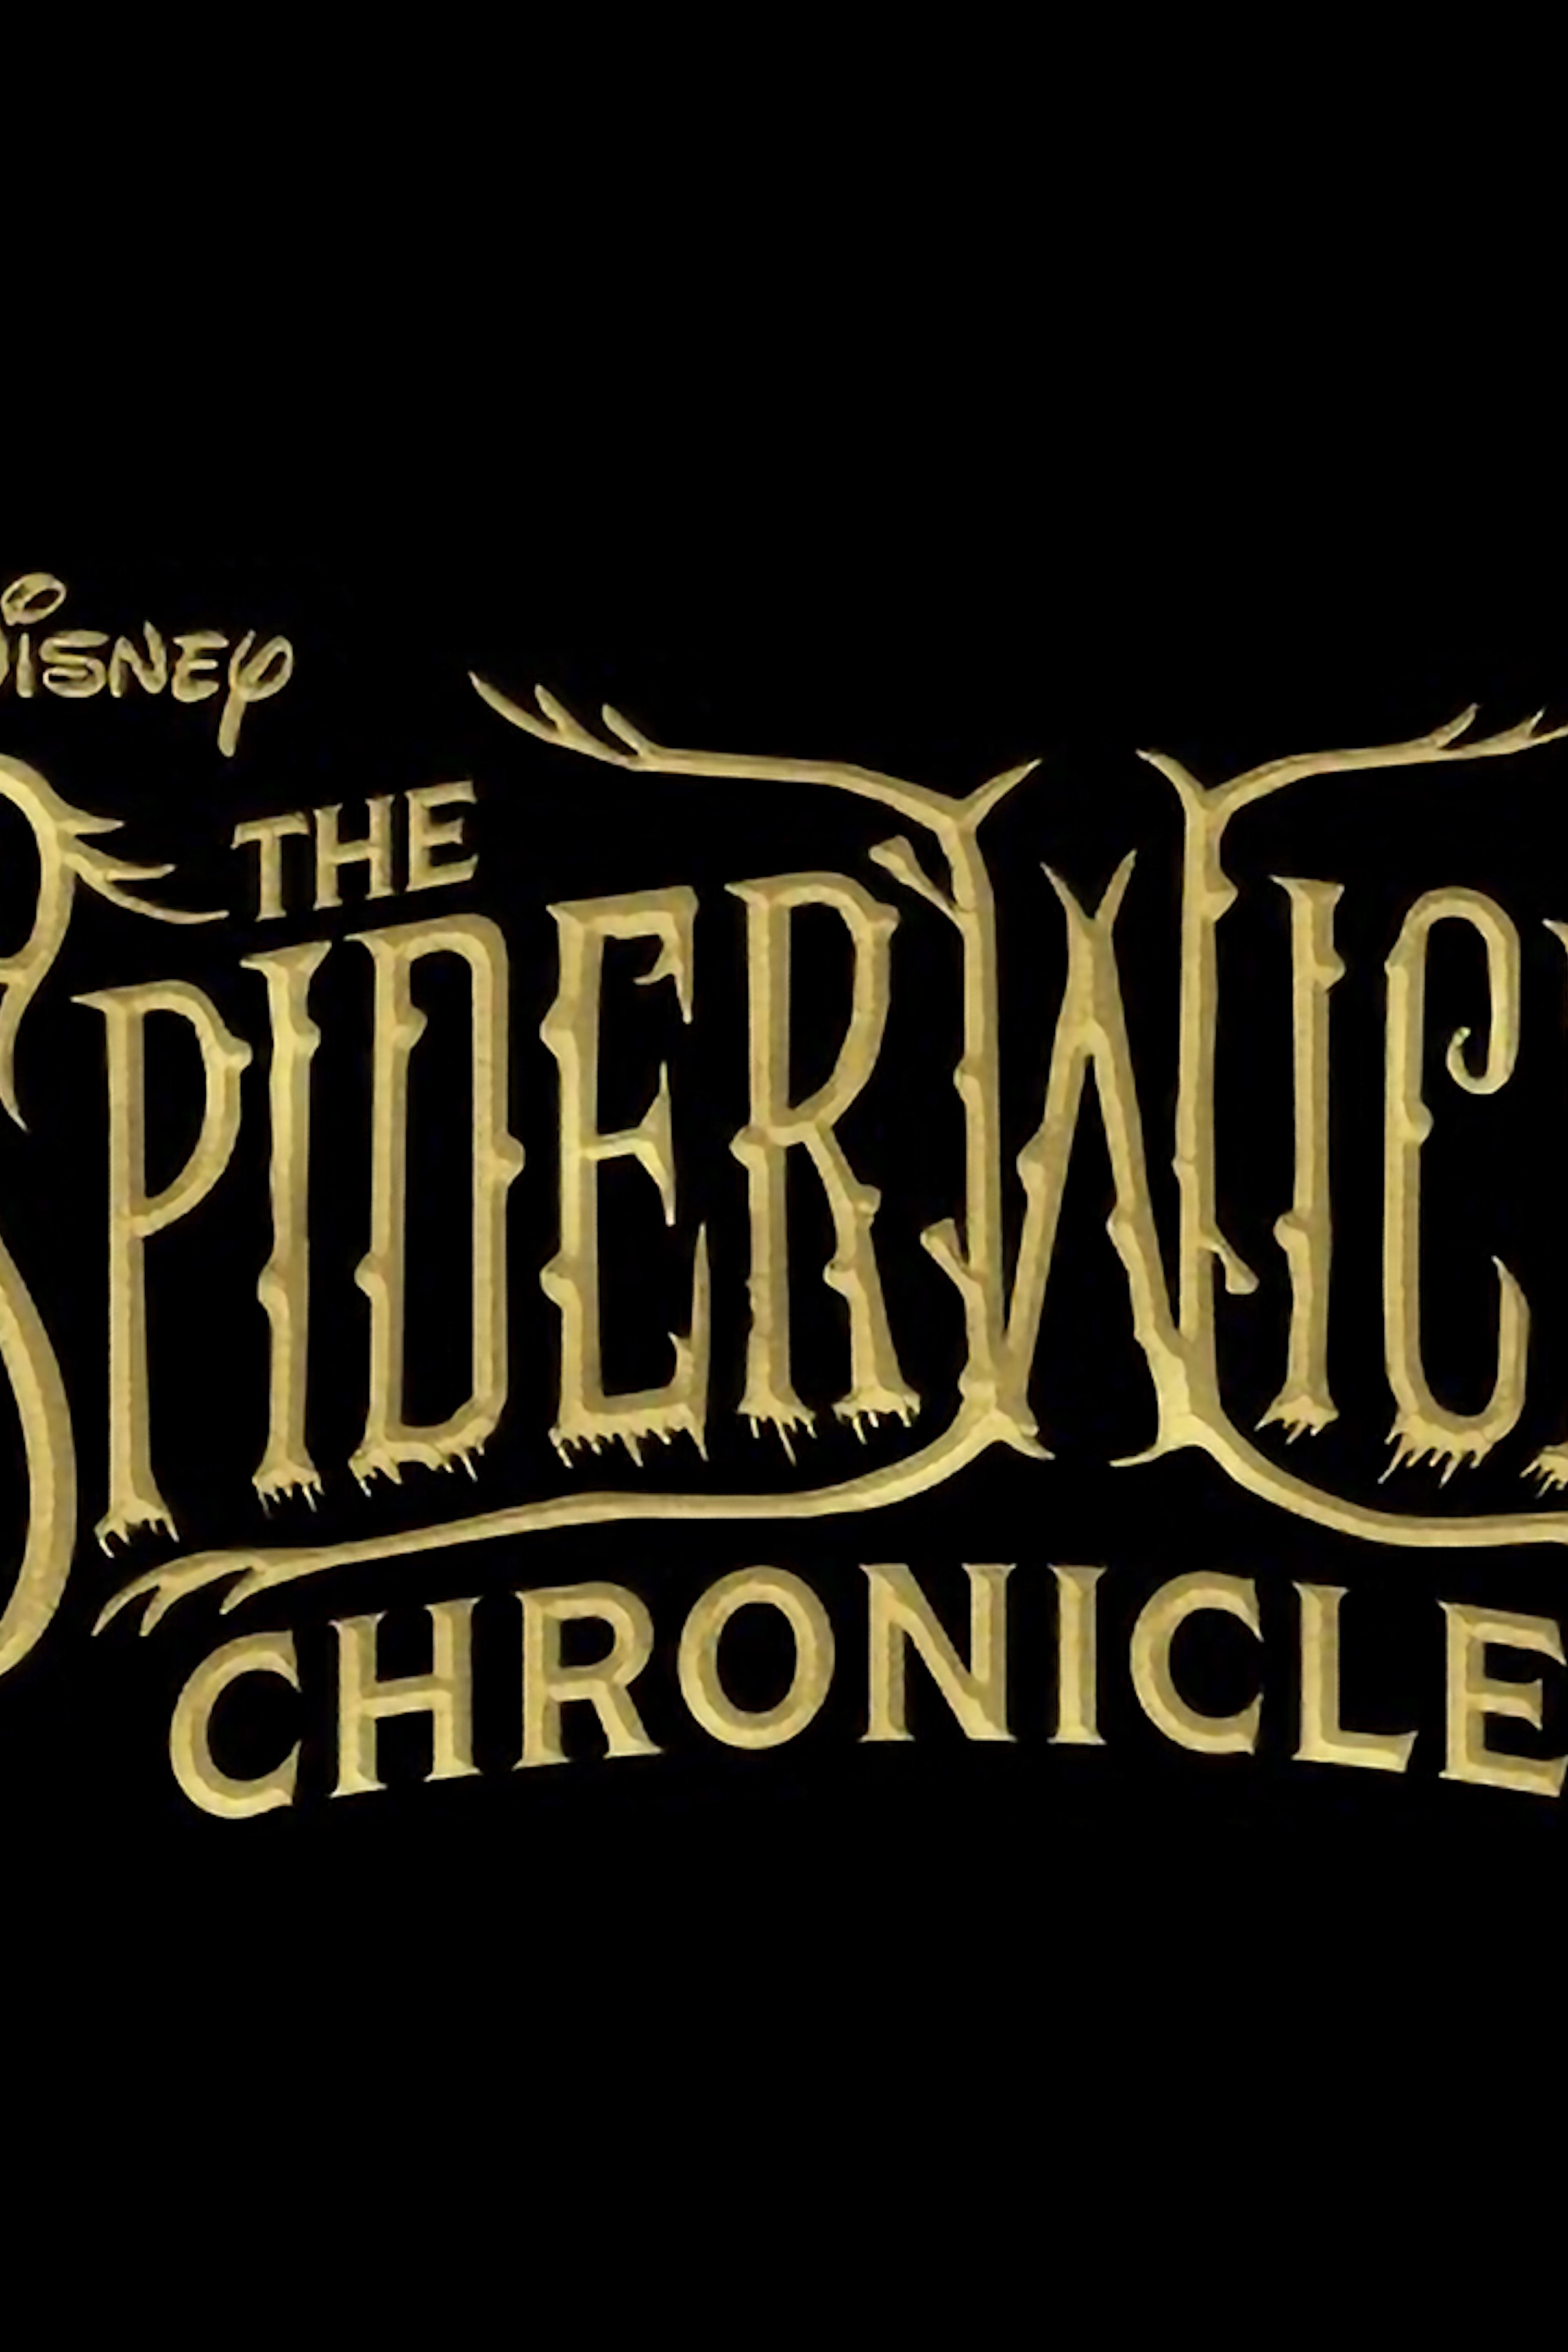 In Production: The Spiderwick Chronicles